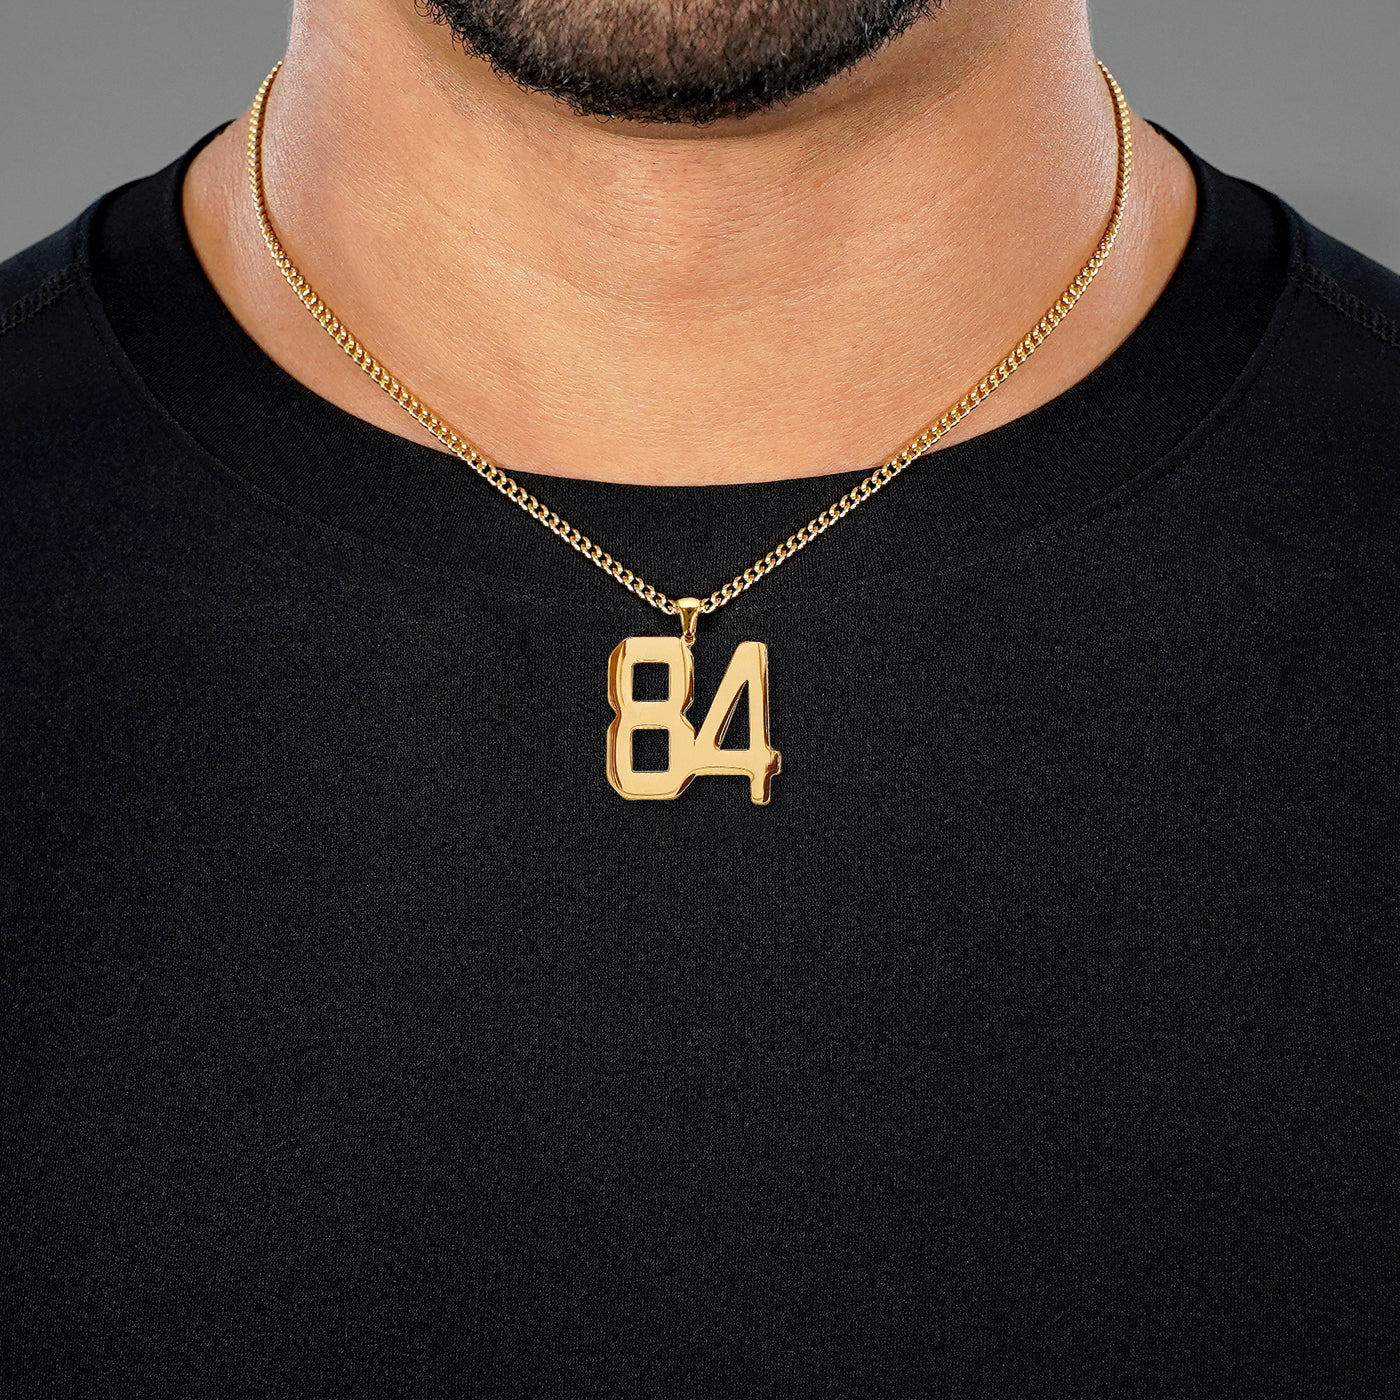 84 Number Pendant with Chain Necklace - Gold Plated Stainless Steel